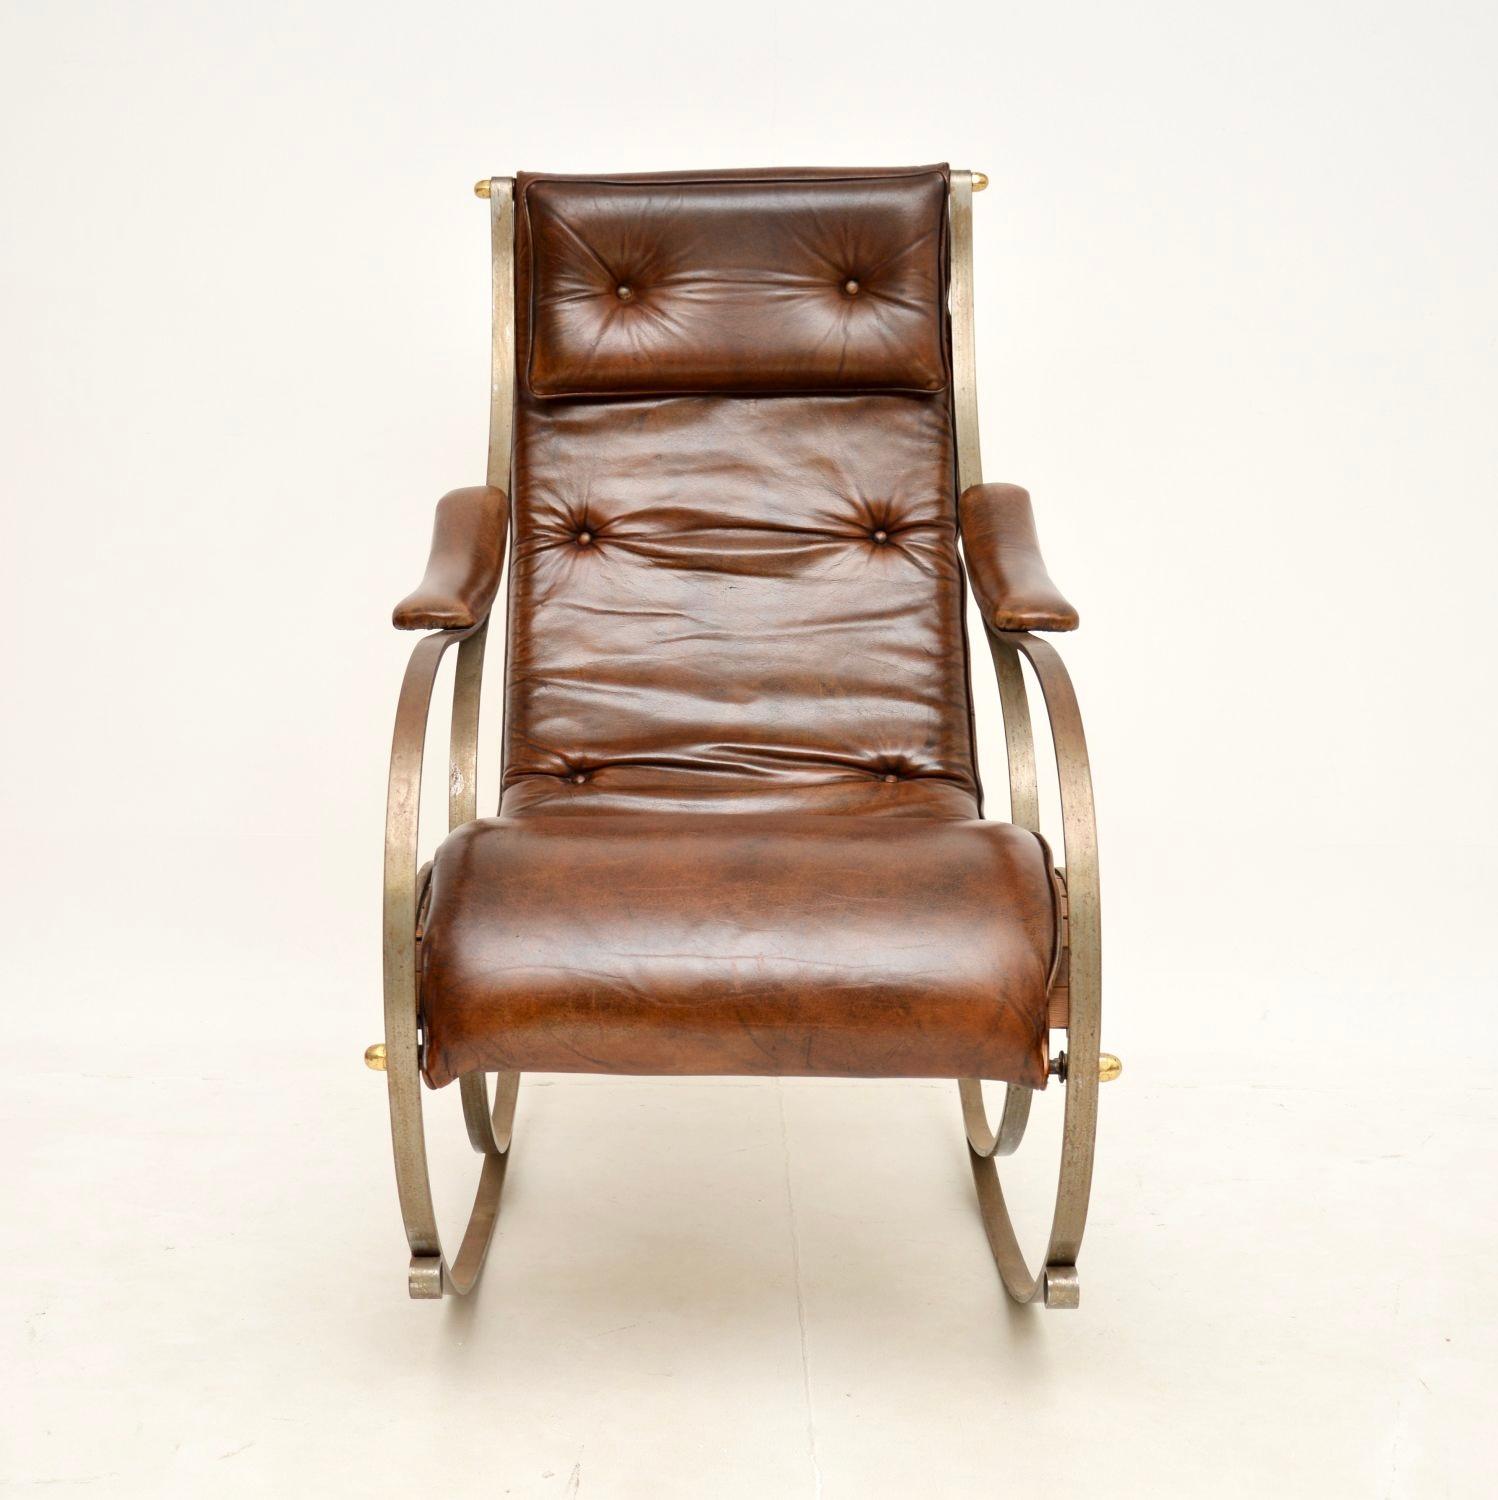 Antique Victorian Steel and Leather Rocking Chair by Peter Cooper for R.W Winfie In Good Condition For Sale In London, GB